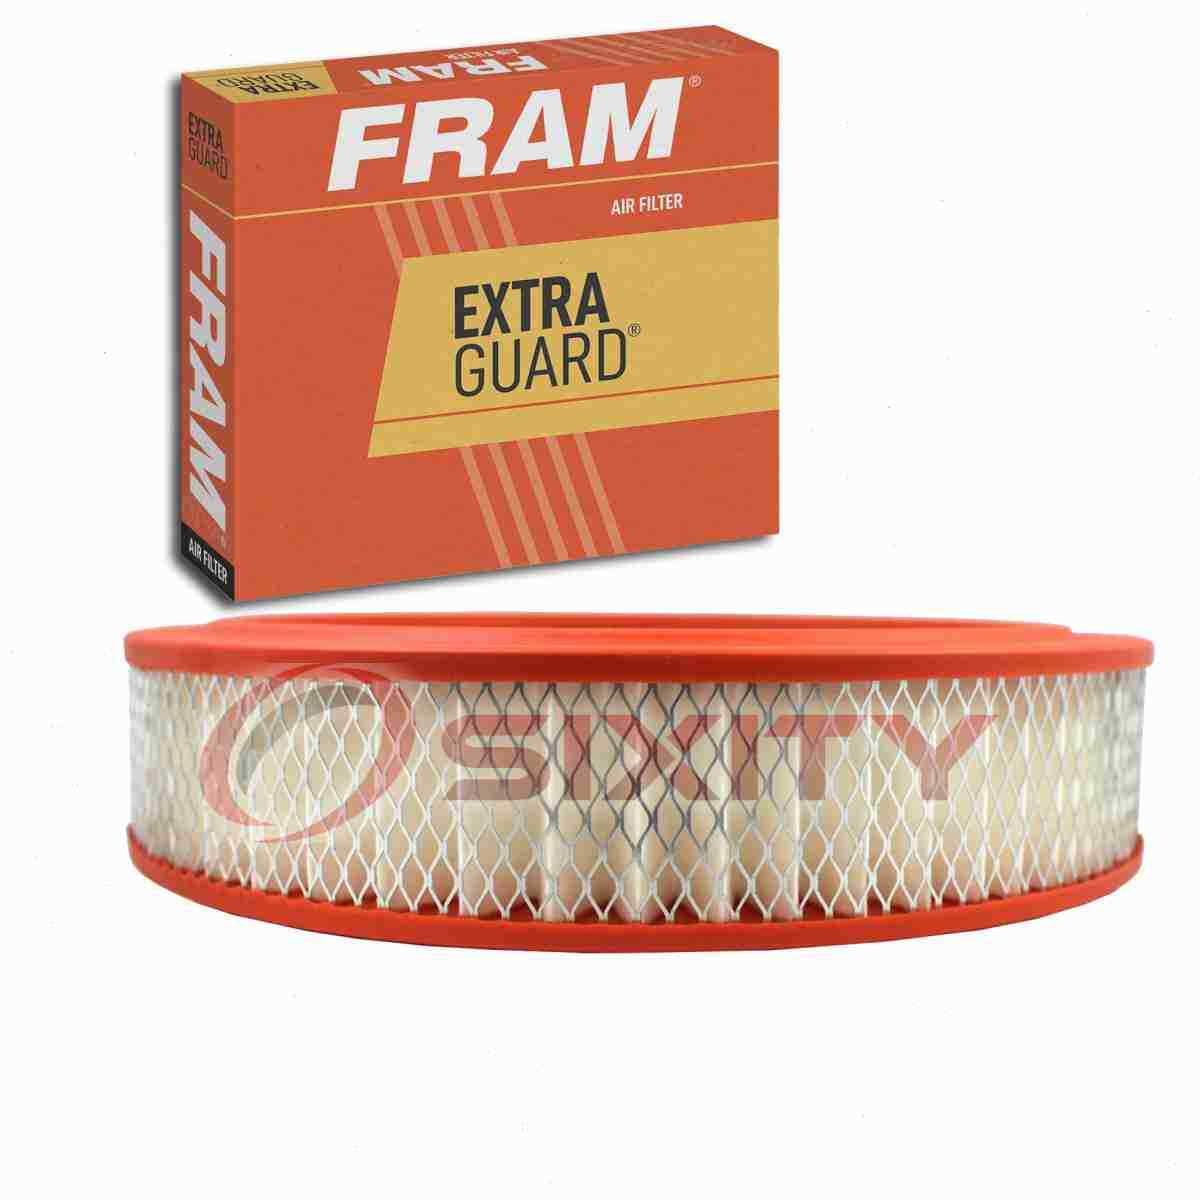 FRAM Extra Guard Air Filter for 1975-1980 Mercury Monarch Intake Inlet gl